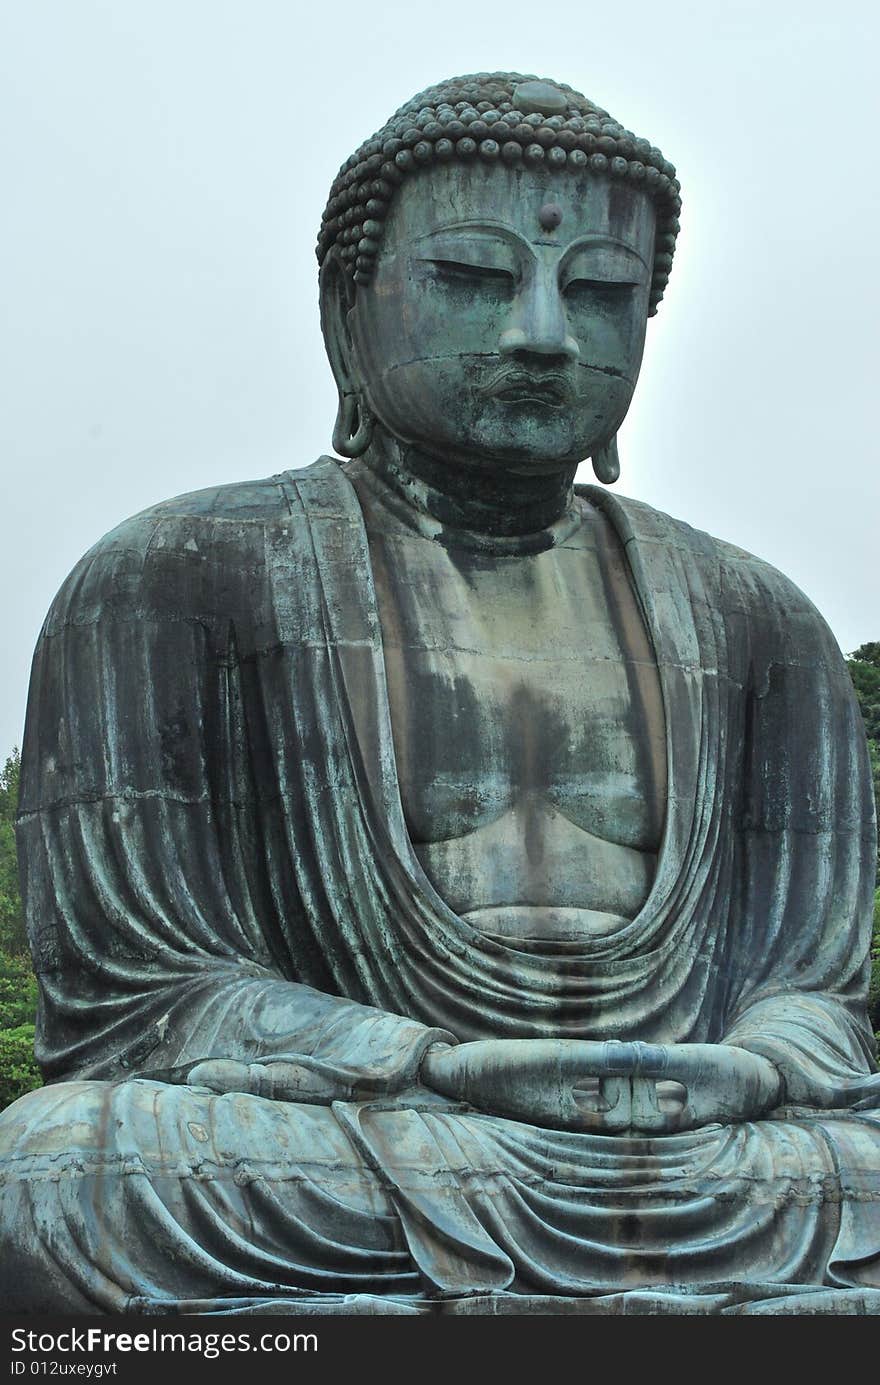 The Great Buddha of Kamakura in Japan. The second largest buddha in Japan